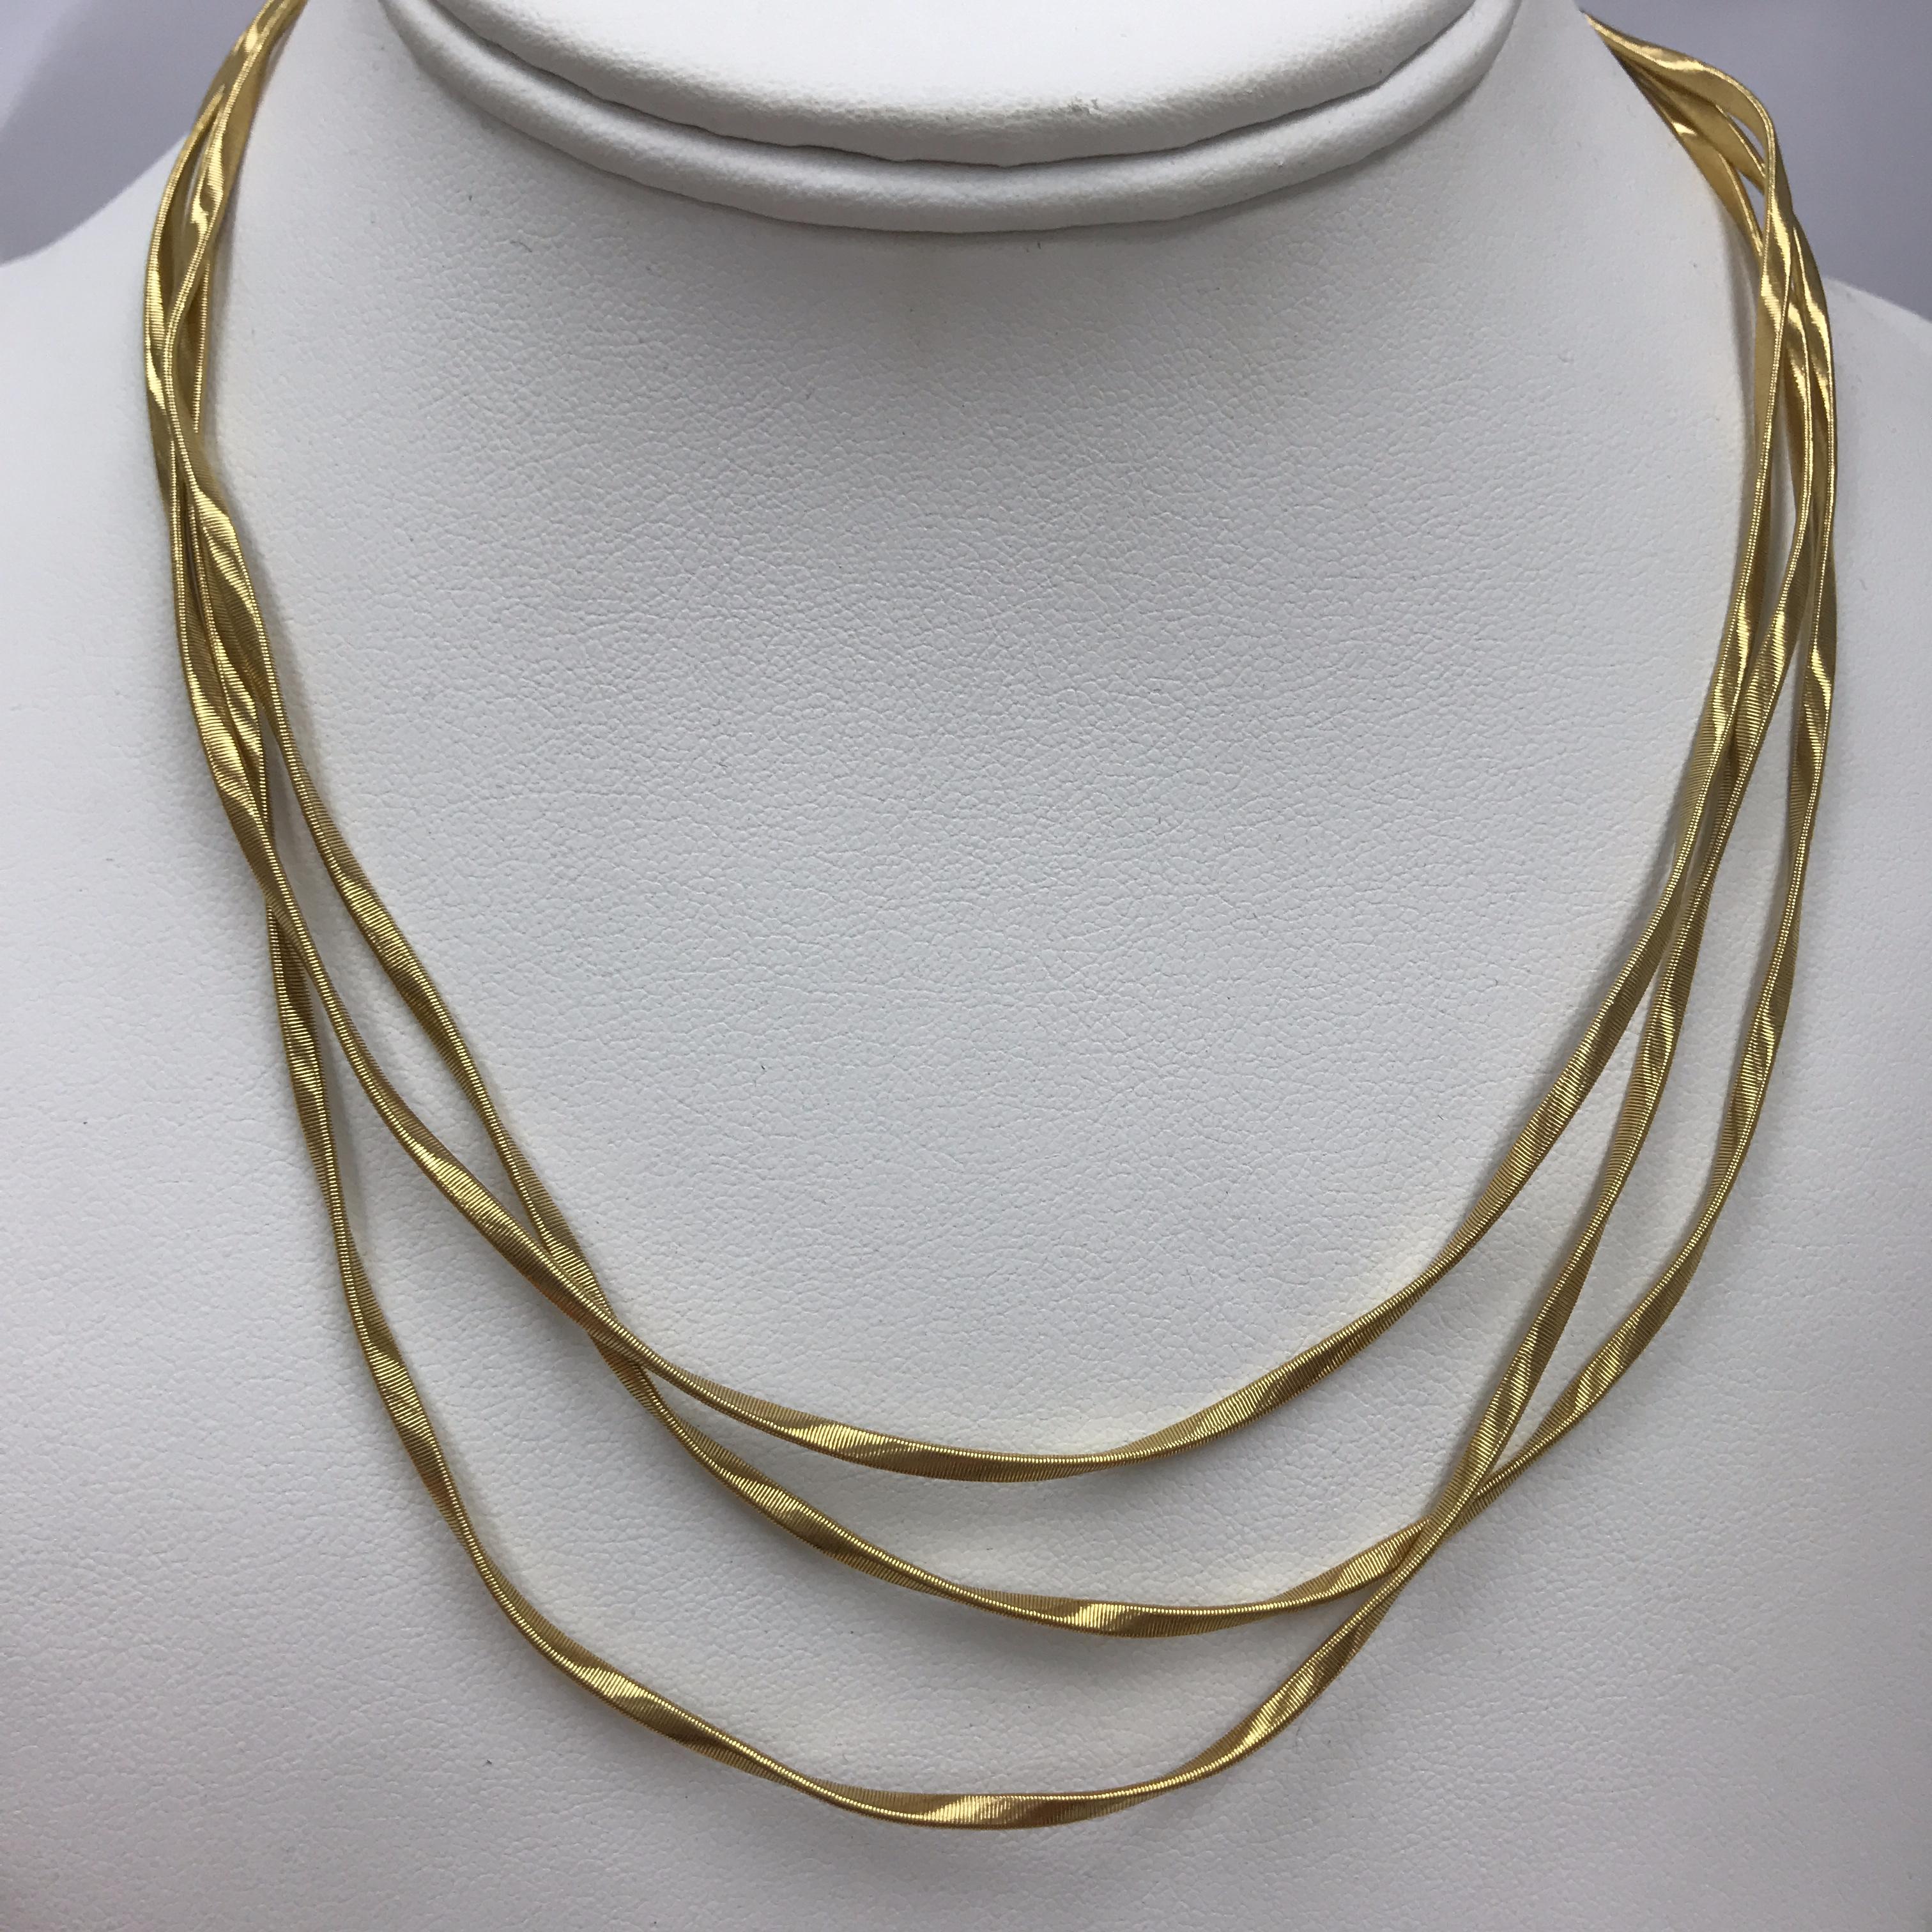 18 Karat Marco Bicego Necklace Marrakech Collection Yellow Gold In Good Condition For Sale In Boca Raton, FL